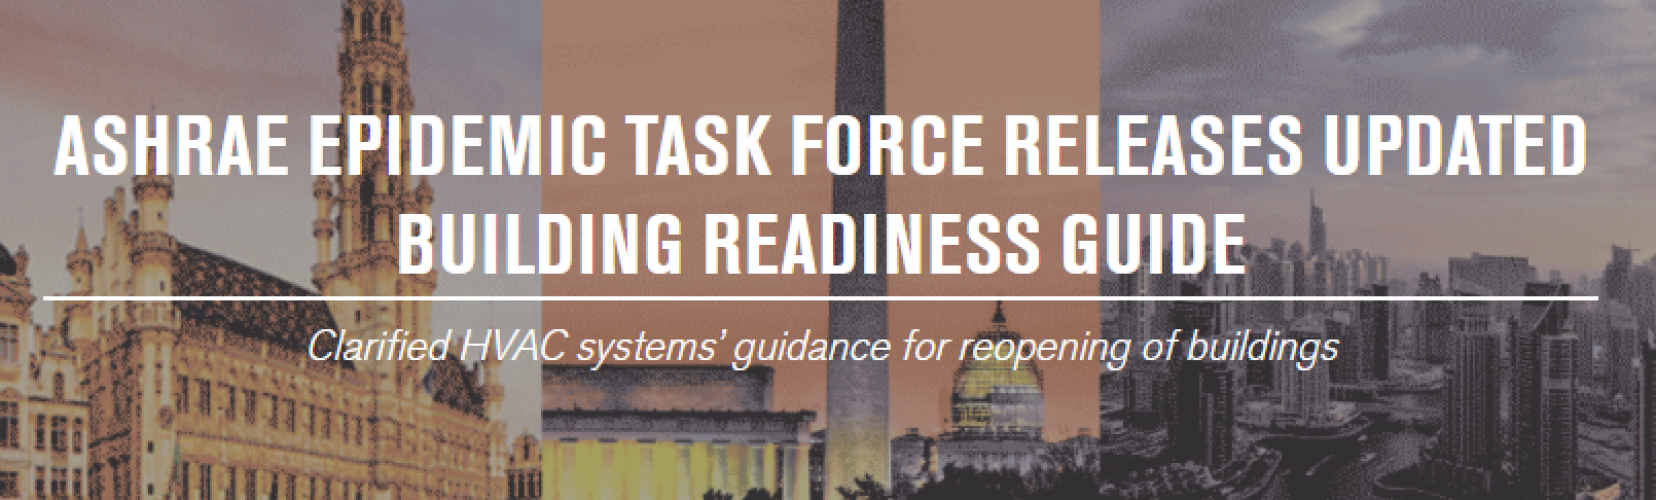 ashrae-epidemic-task-force-releases-updated-building-readiness-guide